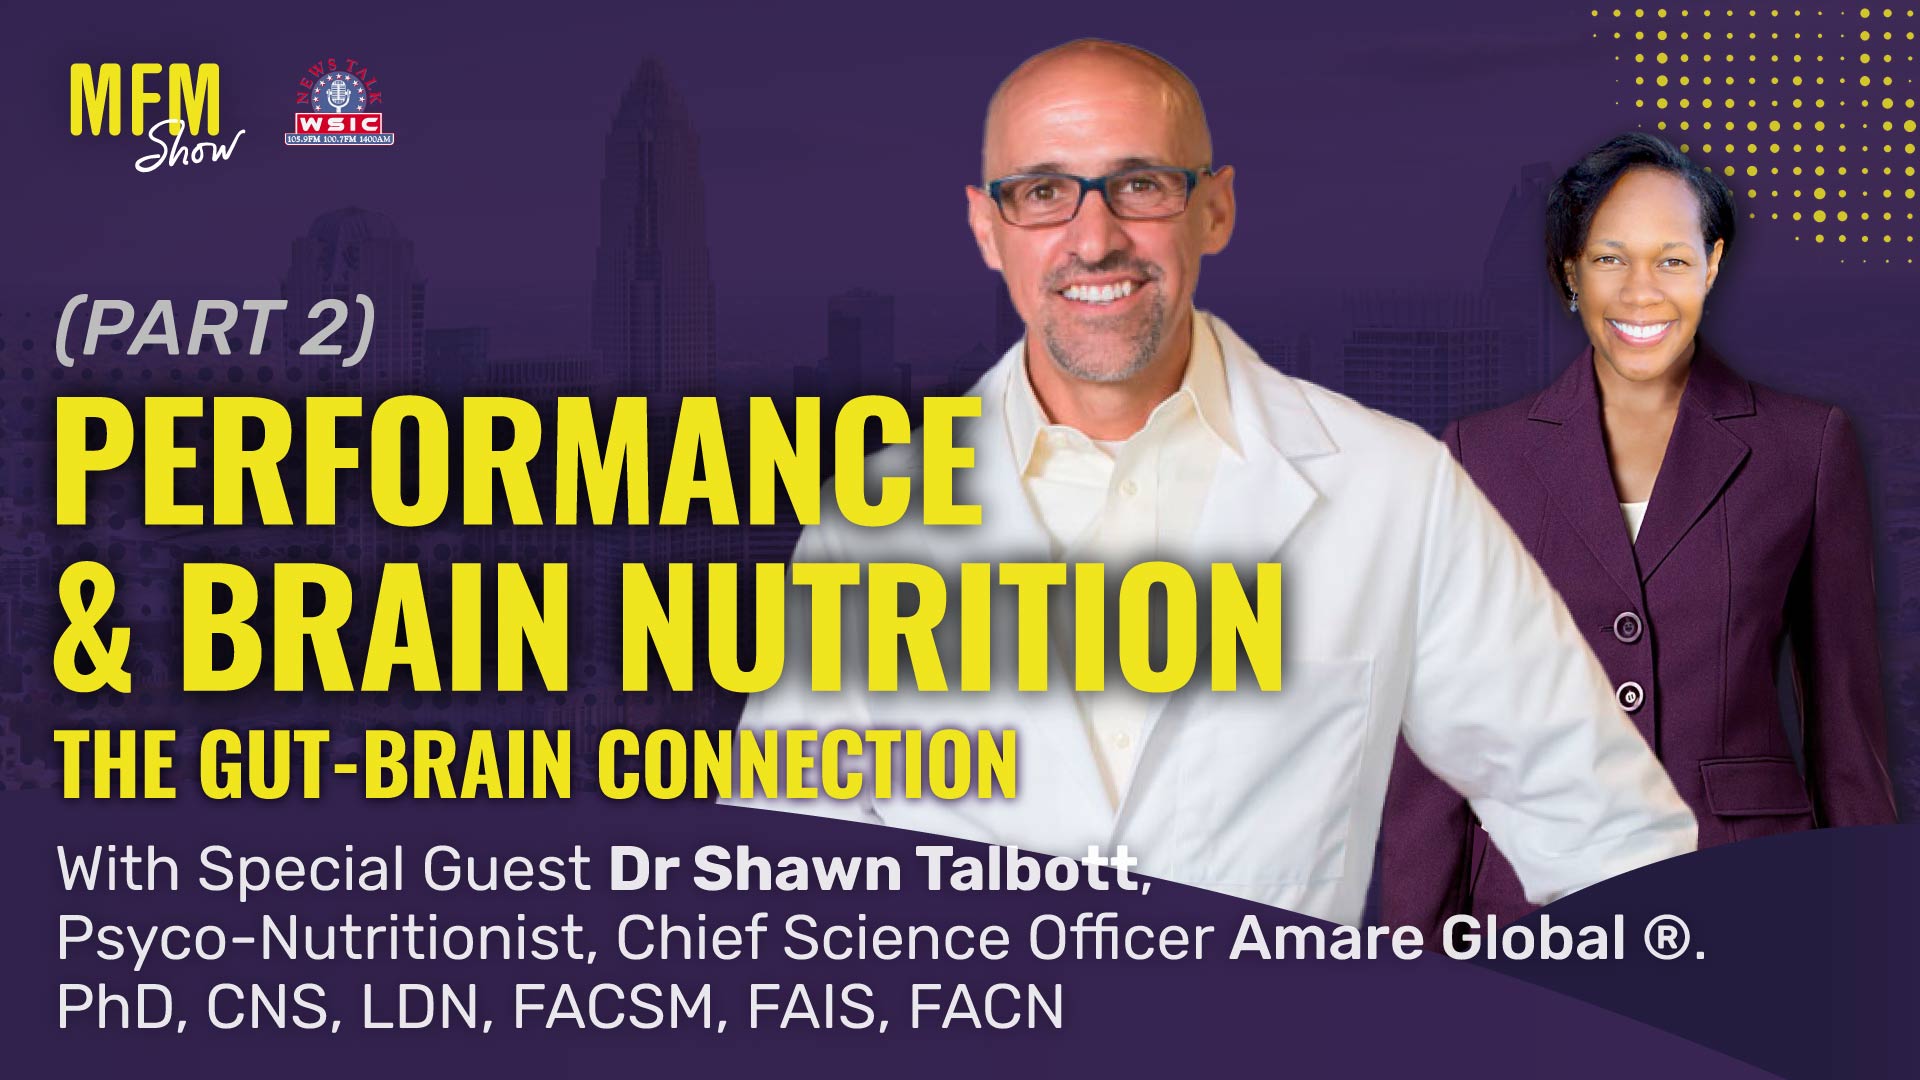 Performance and Brain Nutrition with Dr Shawn Talbott "Amare Global®" (PART 2)